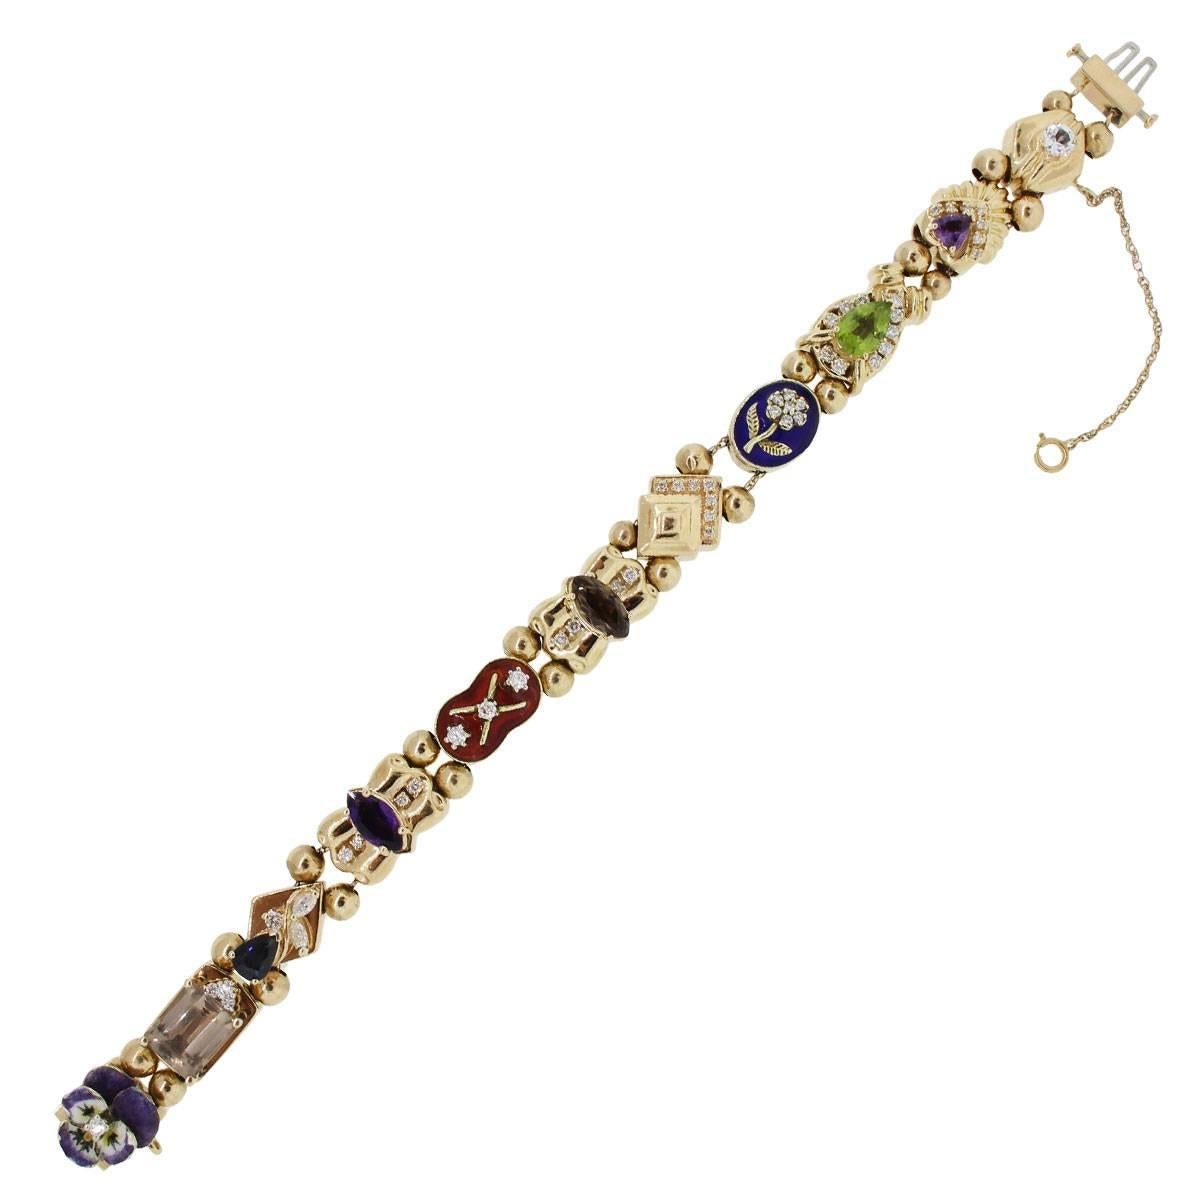 Material: 14k yellow gold
Diamond Details: Approximately 1.20ctw of round brilliant diamonds.
Gemstone Details: Topaz, smoky quartz, sapphire, aquamarine, peridot, amethyst
Fastening: Double tongue in box clasp with safety chain
Measurements: Will